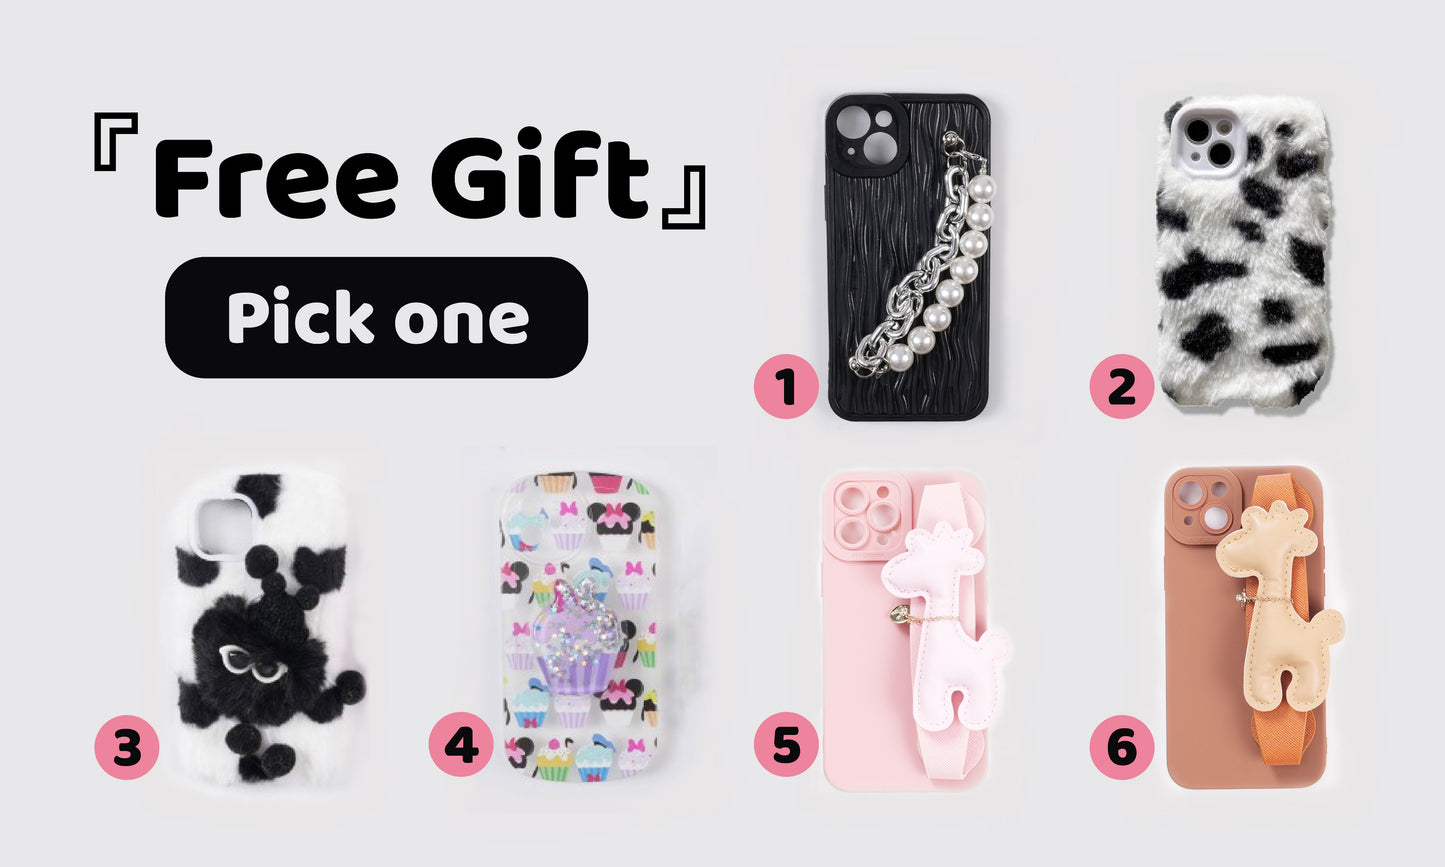 【Taylor】Buy 2 Get 2 Free Gift For Samsung